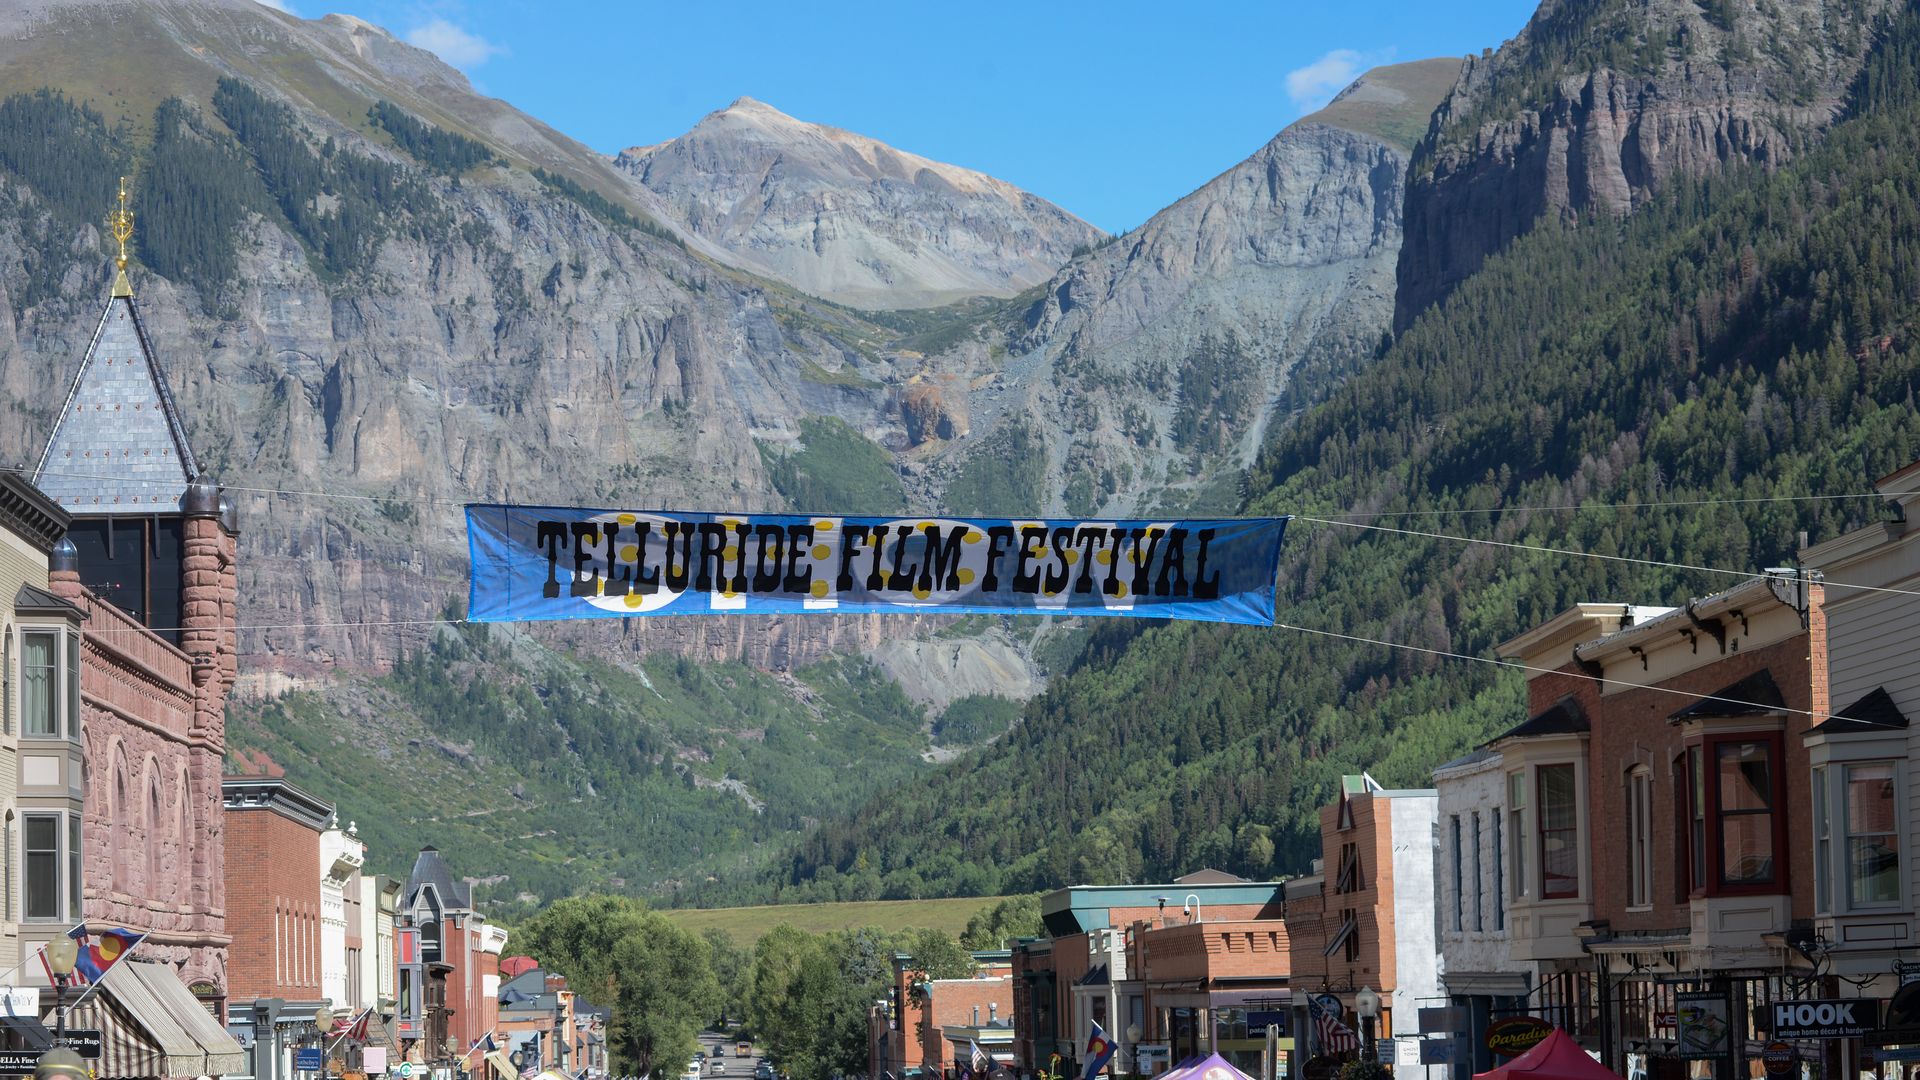 Telluride during the film festival in 2021. Photo: Paul Best/Getty Images